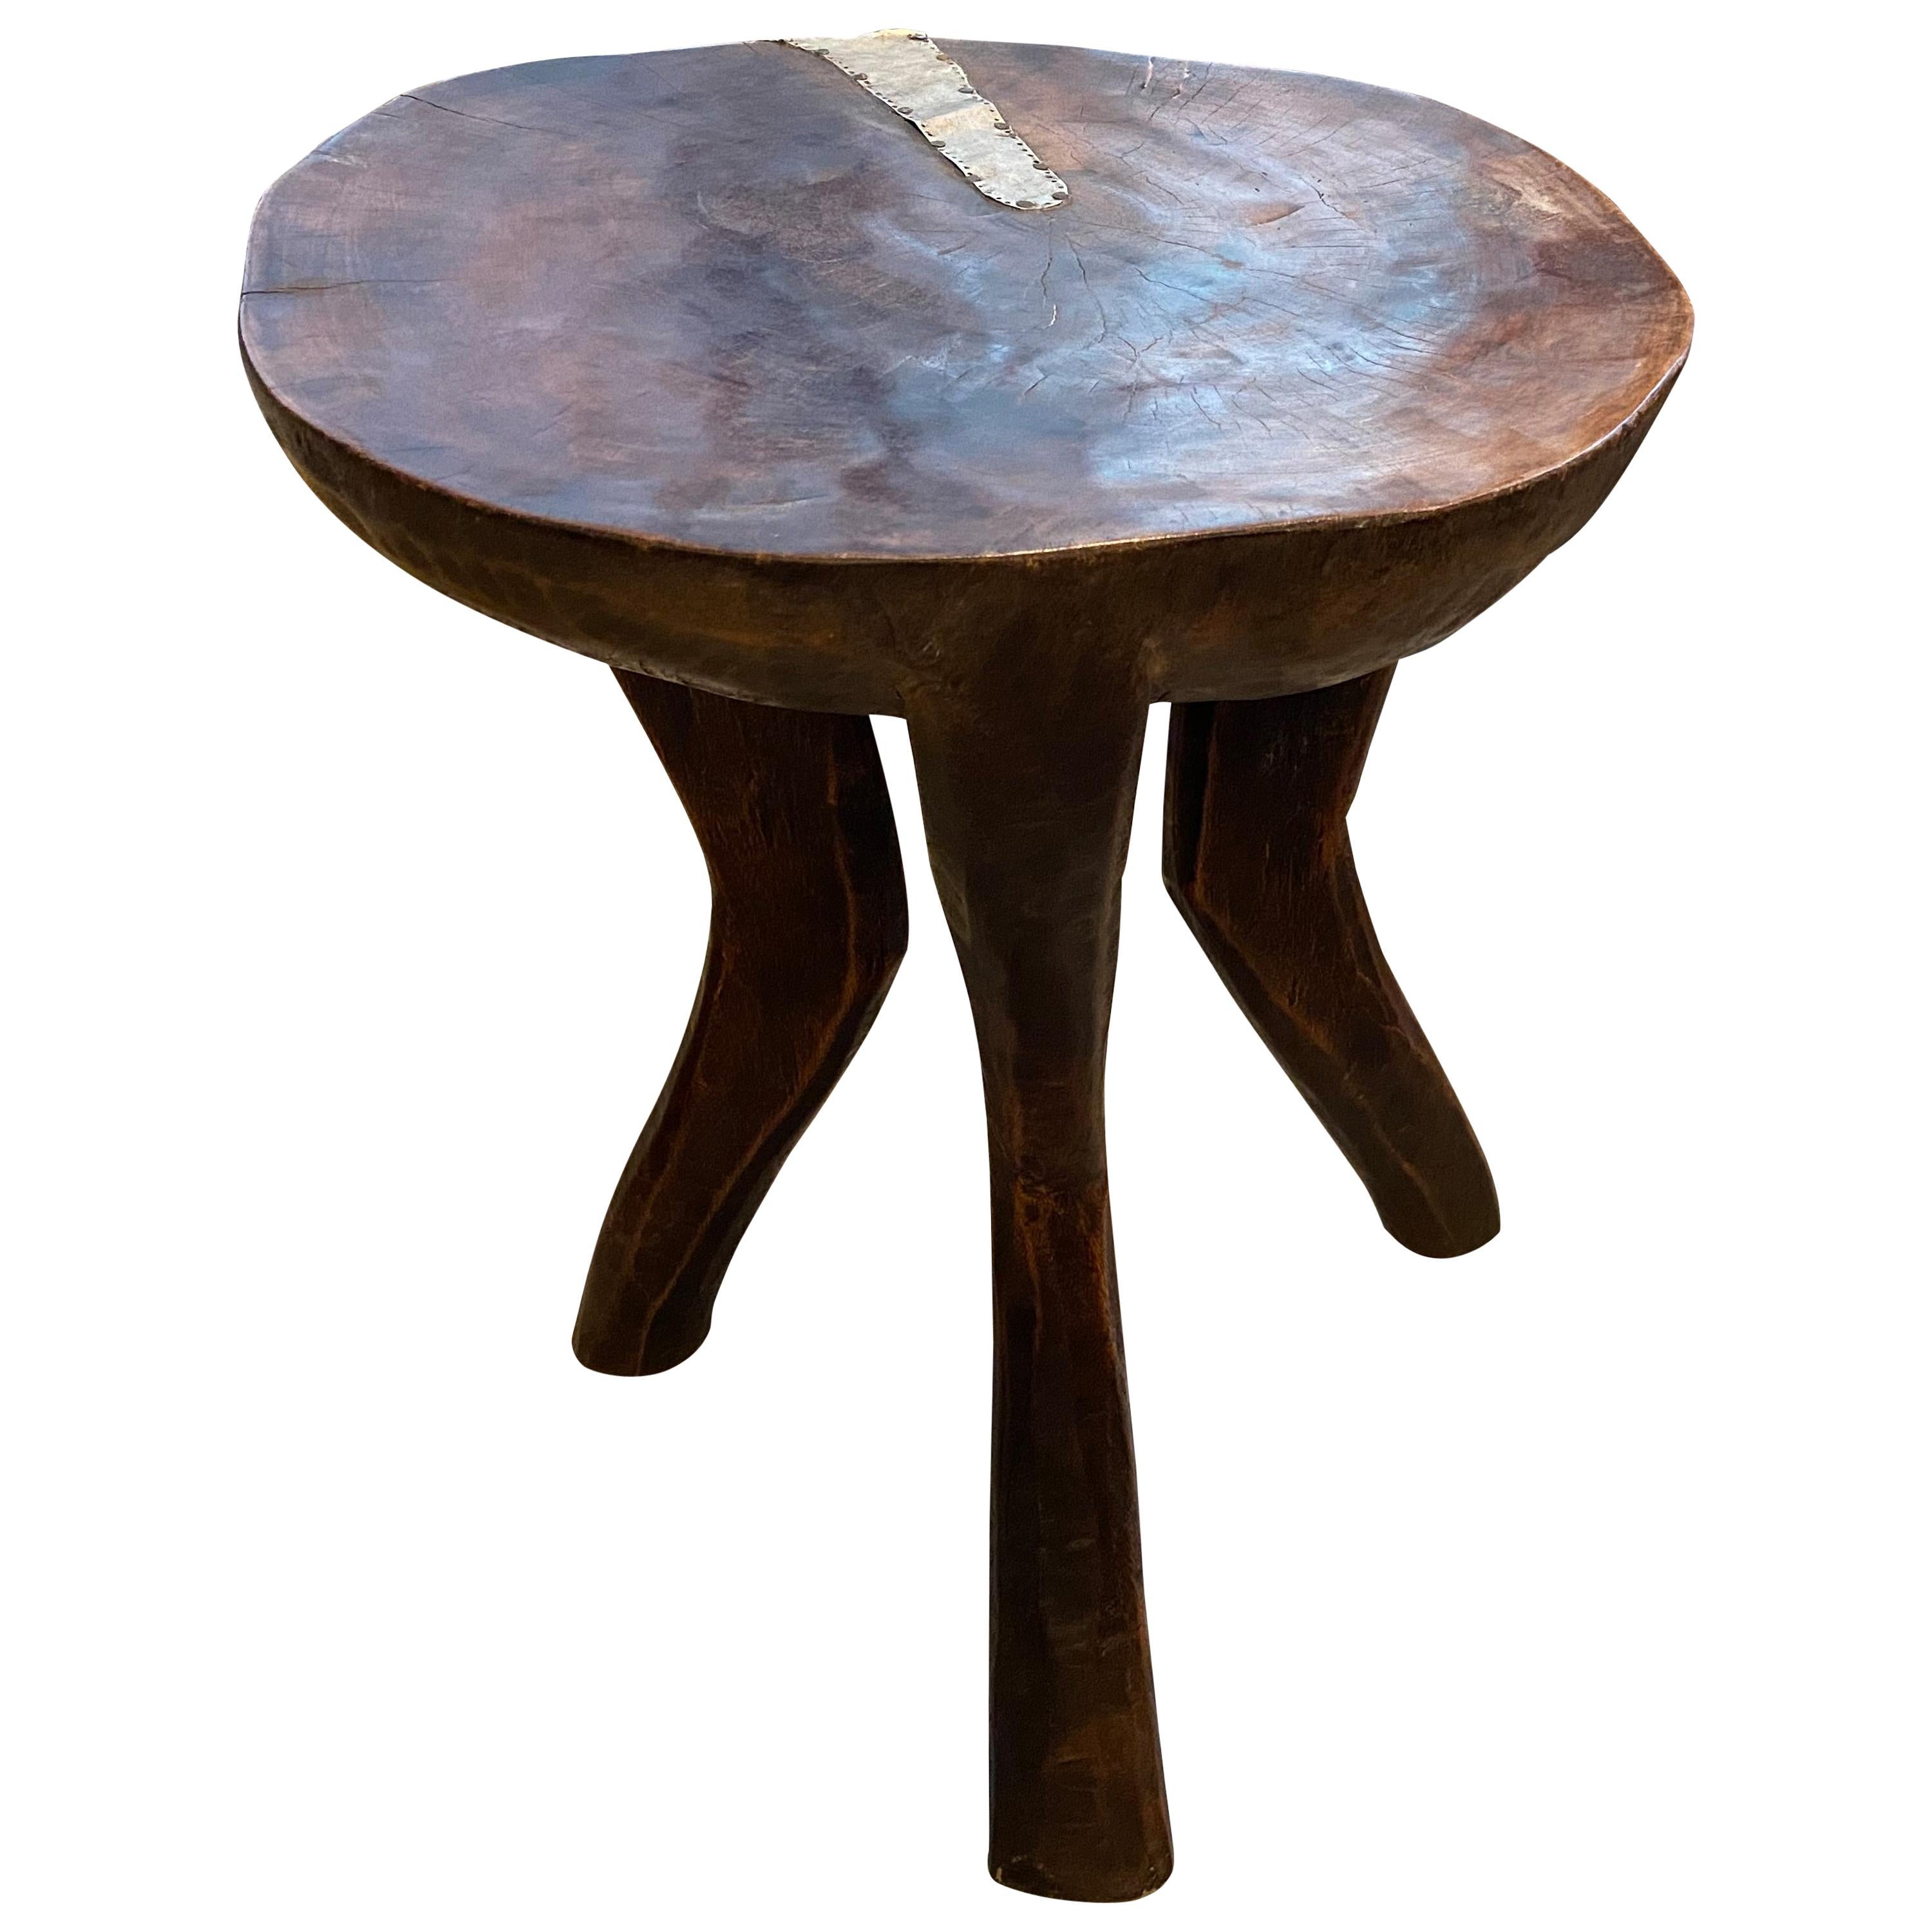 Andrianna Shamaris Antique African Mahogany Wood Sculptural Side Table